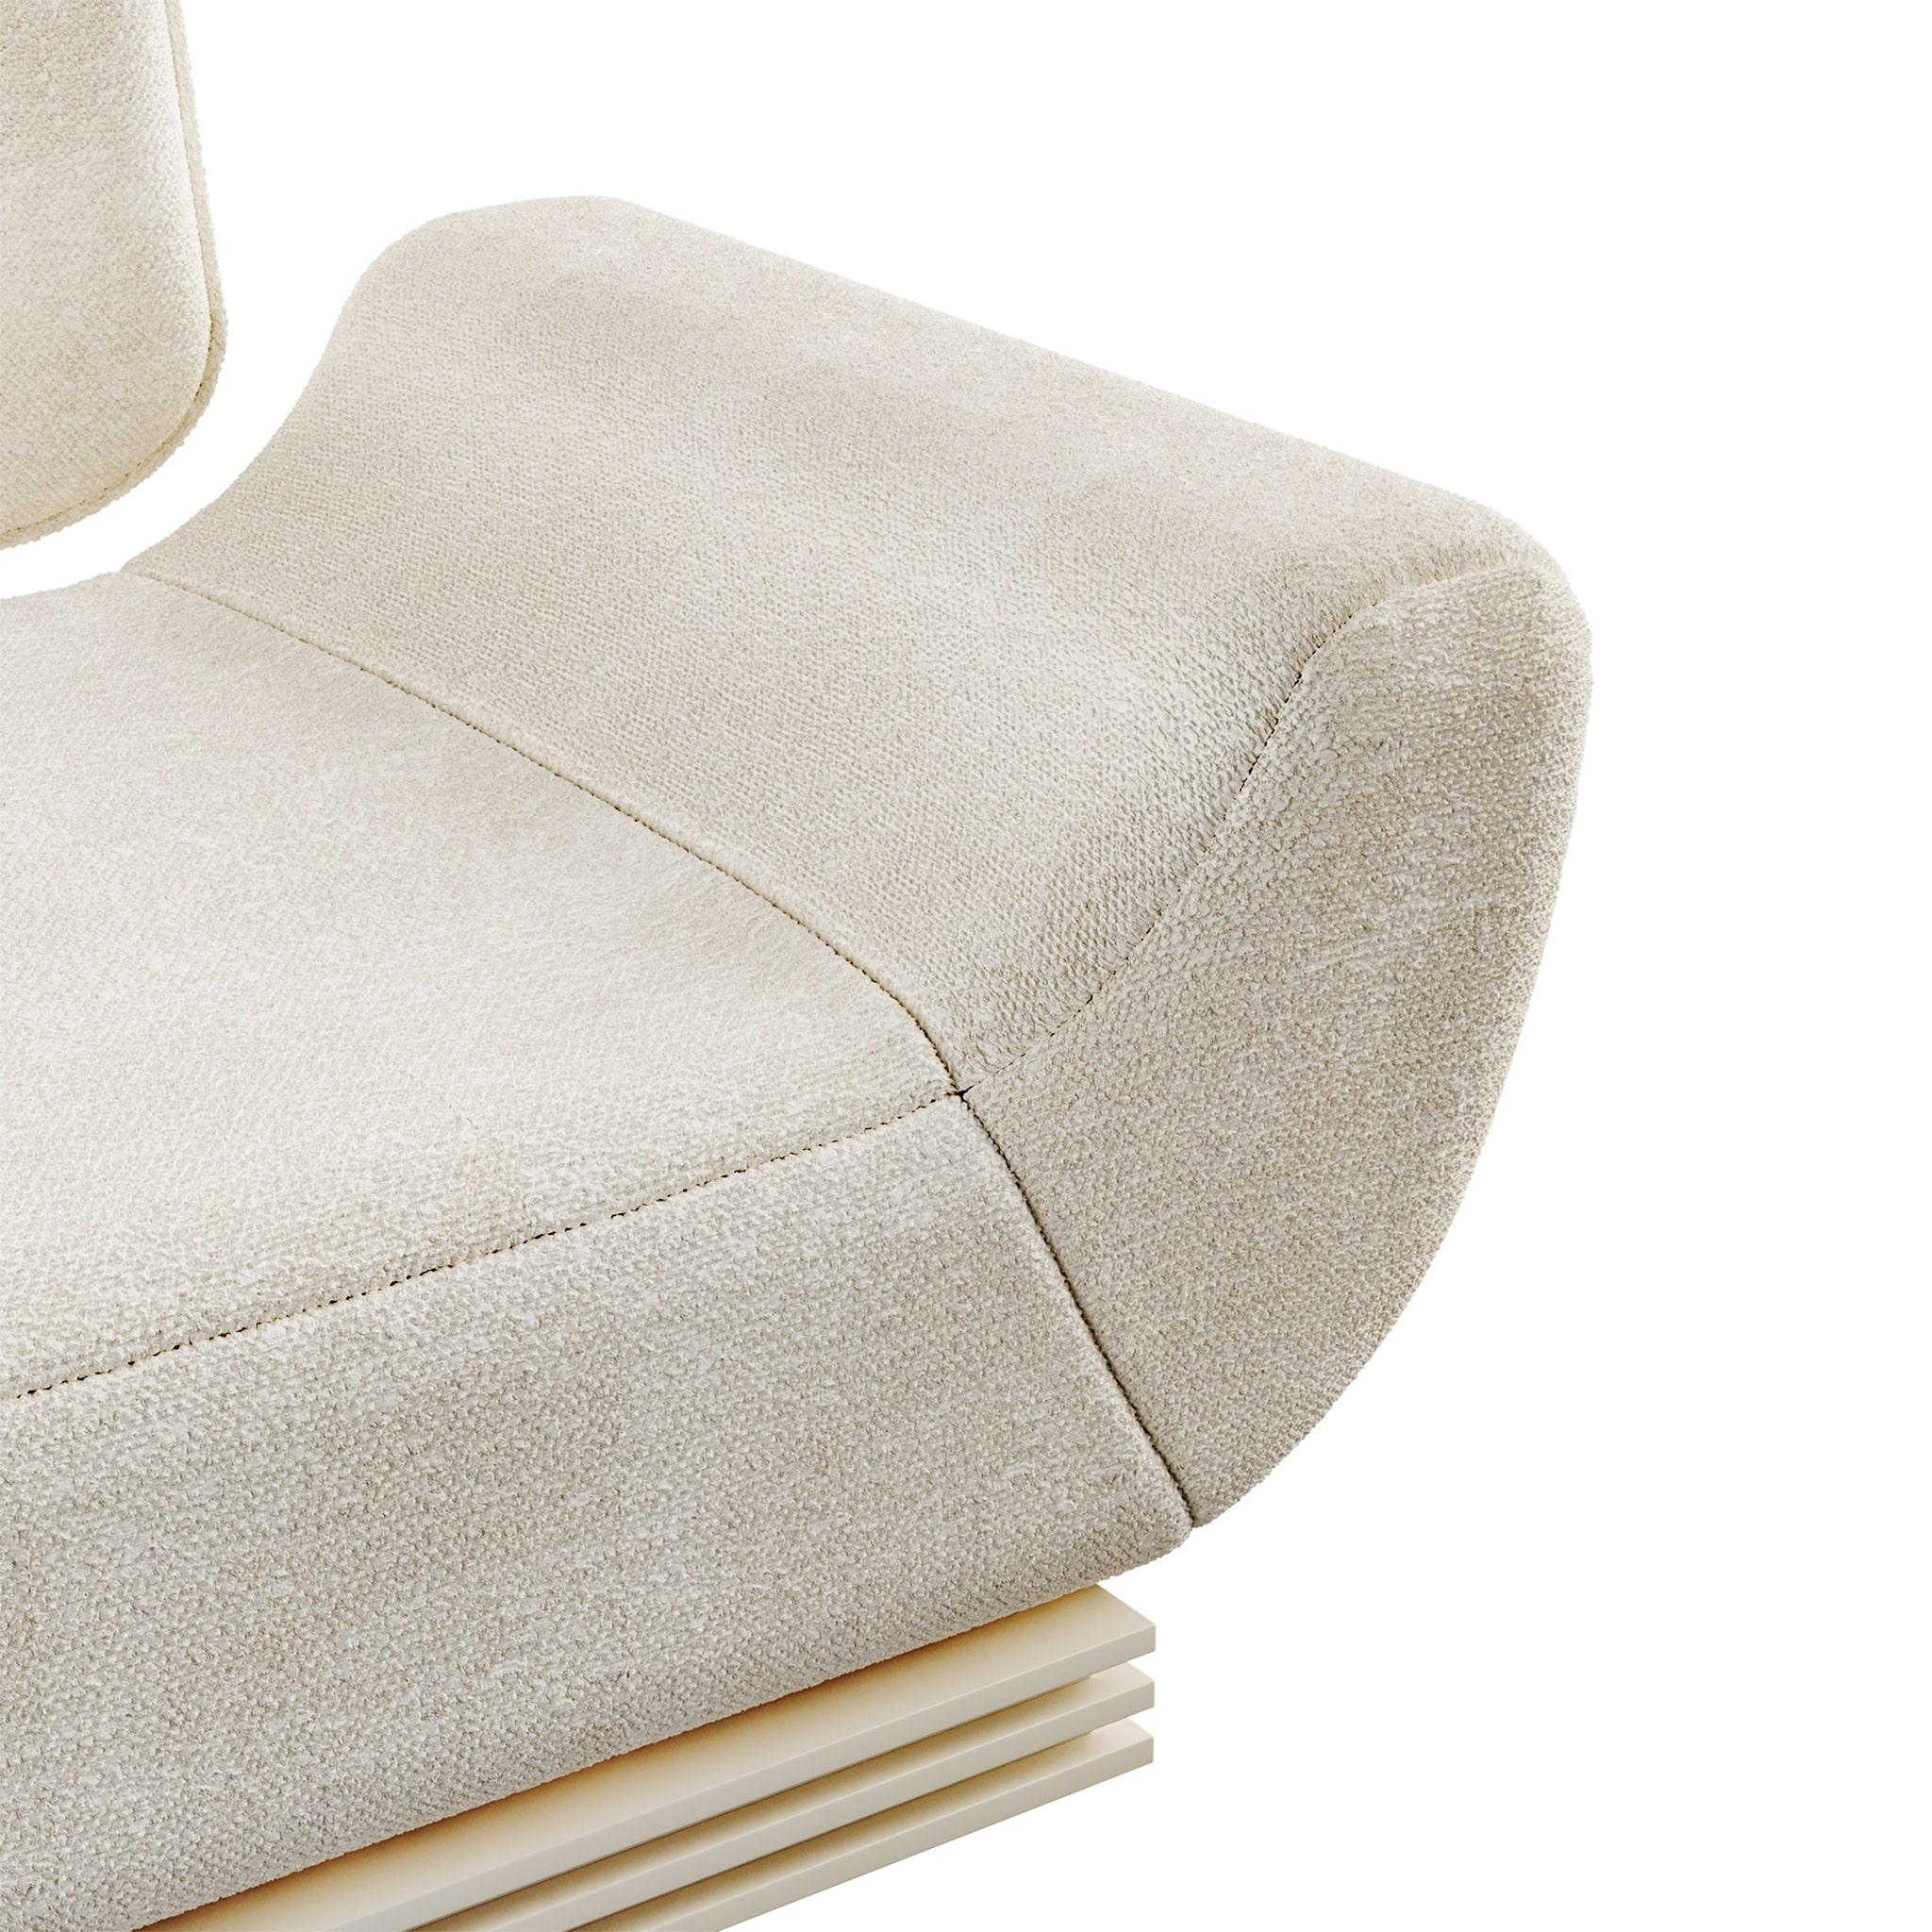 Mid-Century Modern Modern Cream Armchair Bouclé Lacquered in Gloss With Brass Details For Sale